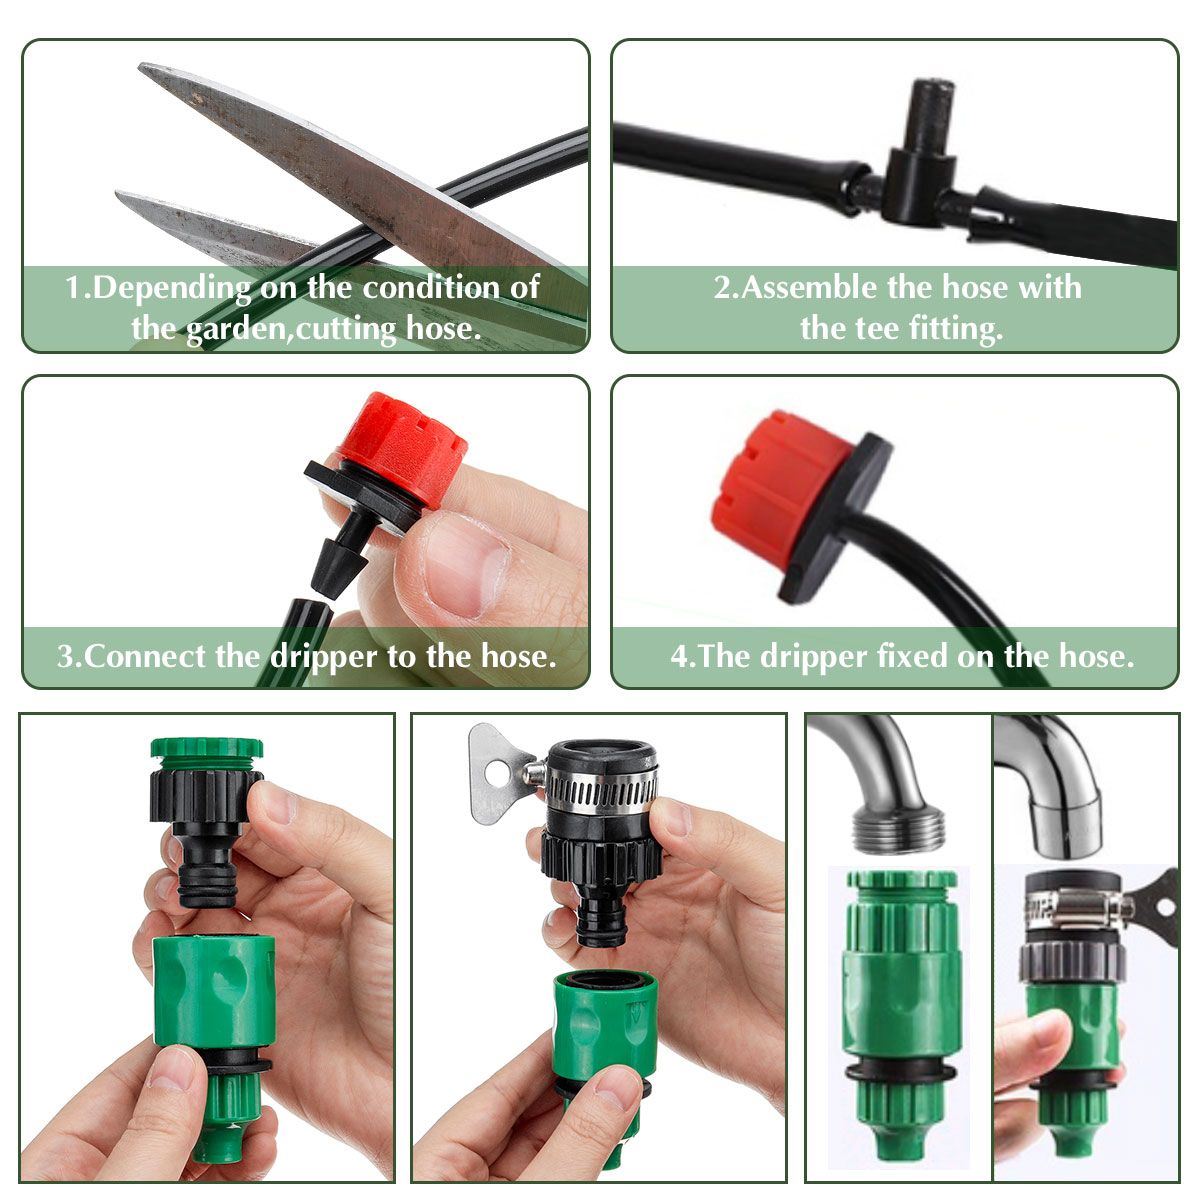 15202530m-DIY-Irrigation-System-Water-Timer-Auto-Plant-Watering-Micro-Drip-Garden-Watering-Kits-1715742